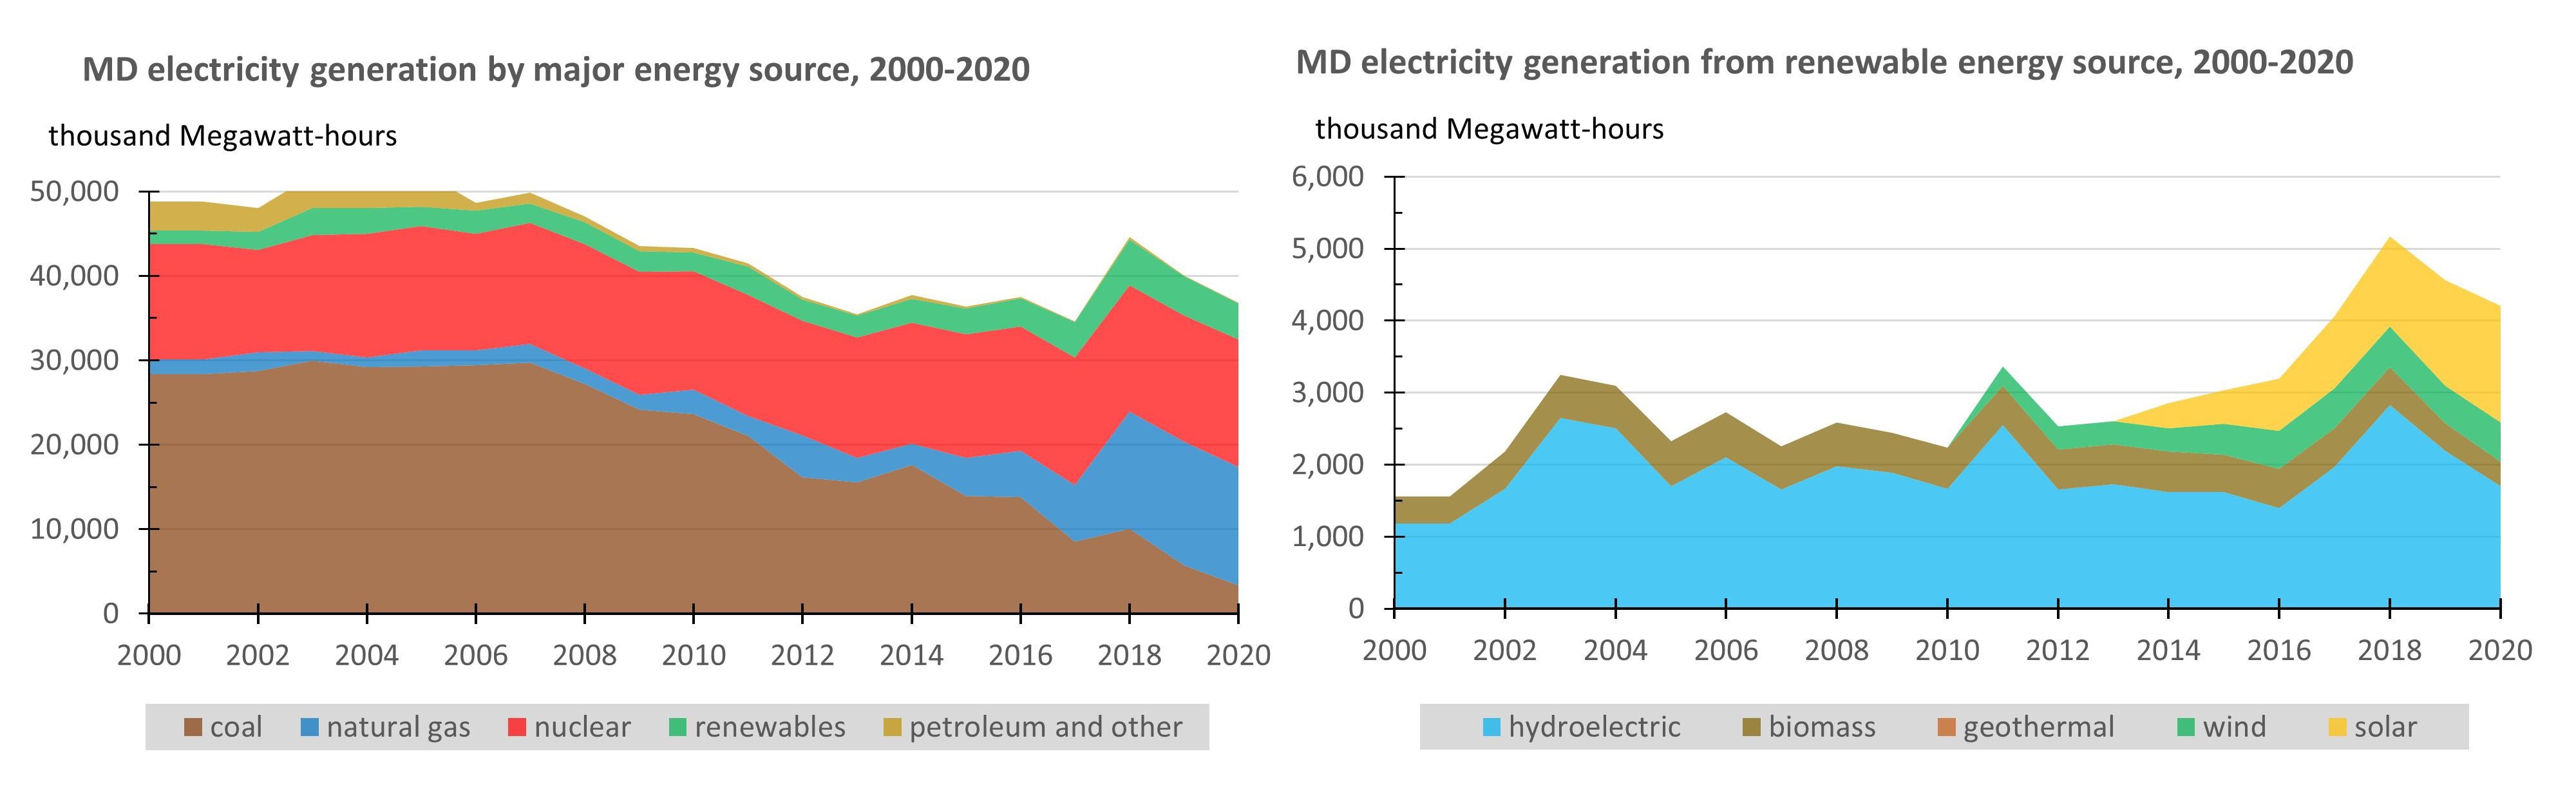 Figure 4. Maryland net electricity generation by a) major energy source; and b) renewable energy sources, 2001-2020. (Data from EIA, 2021b)